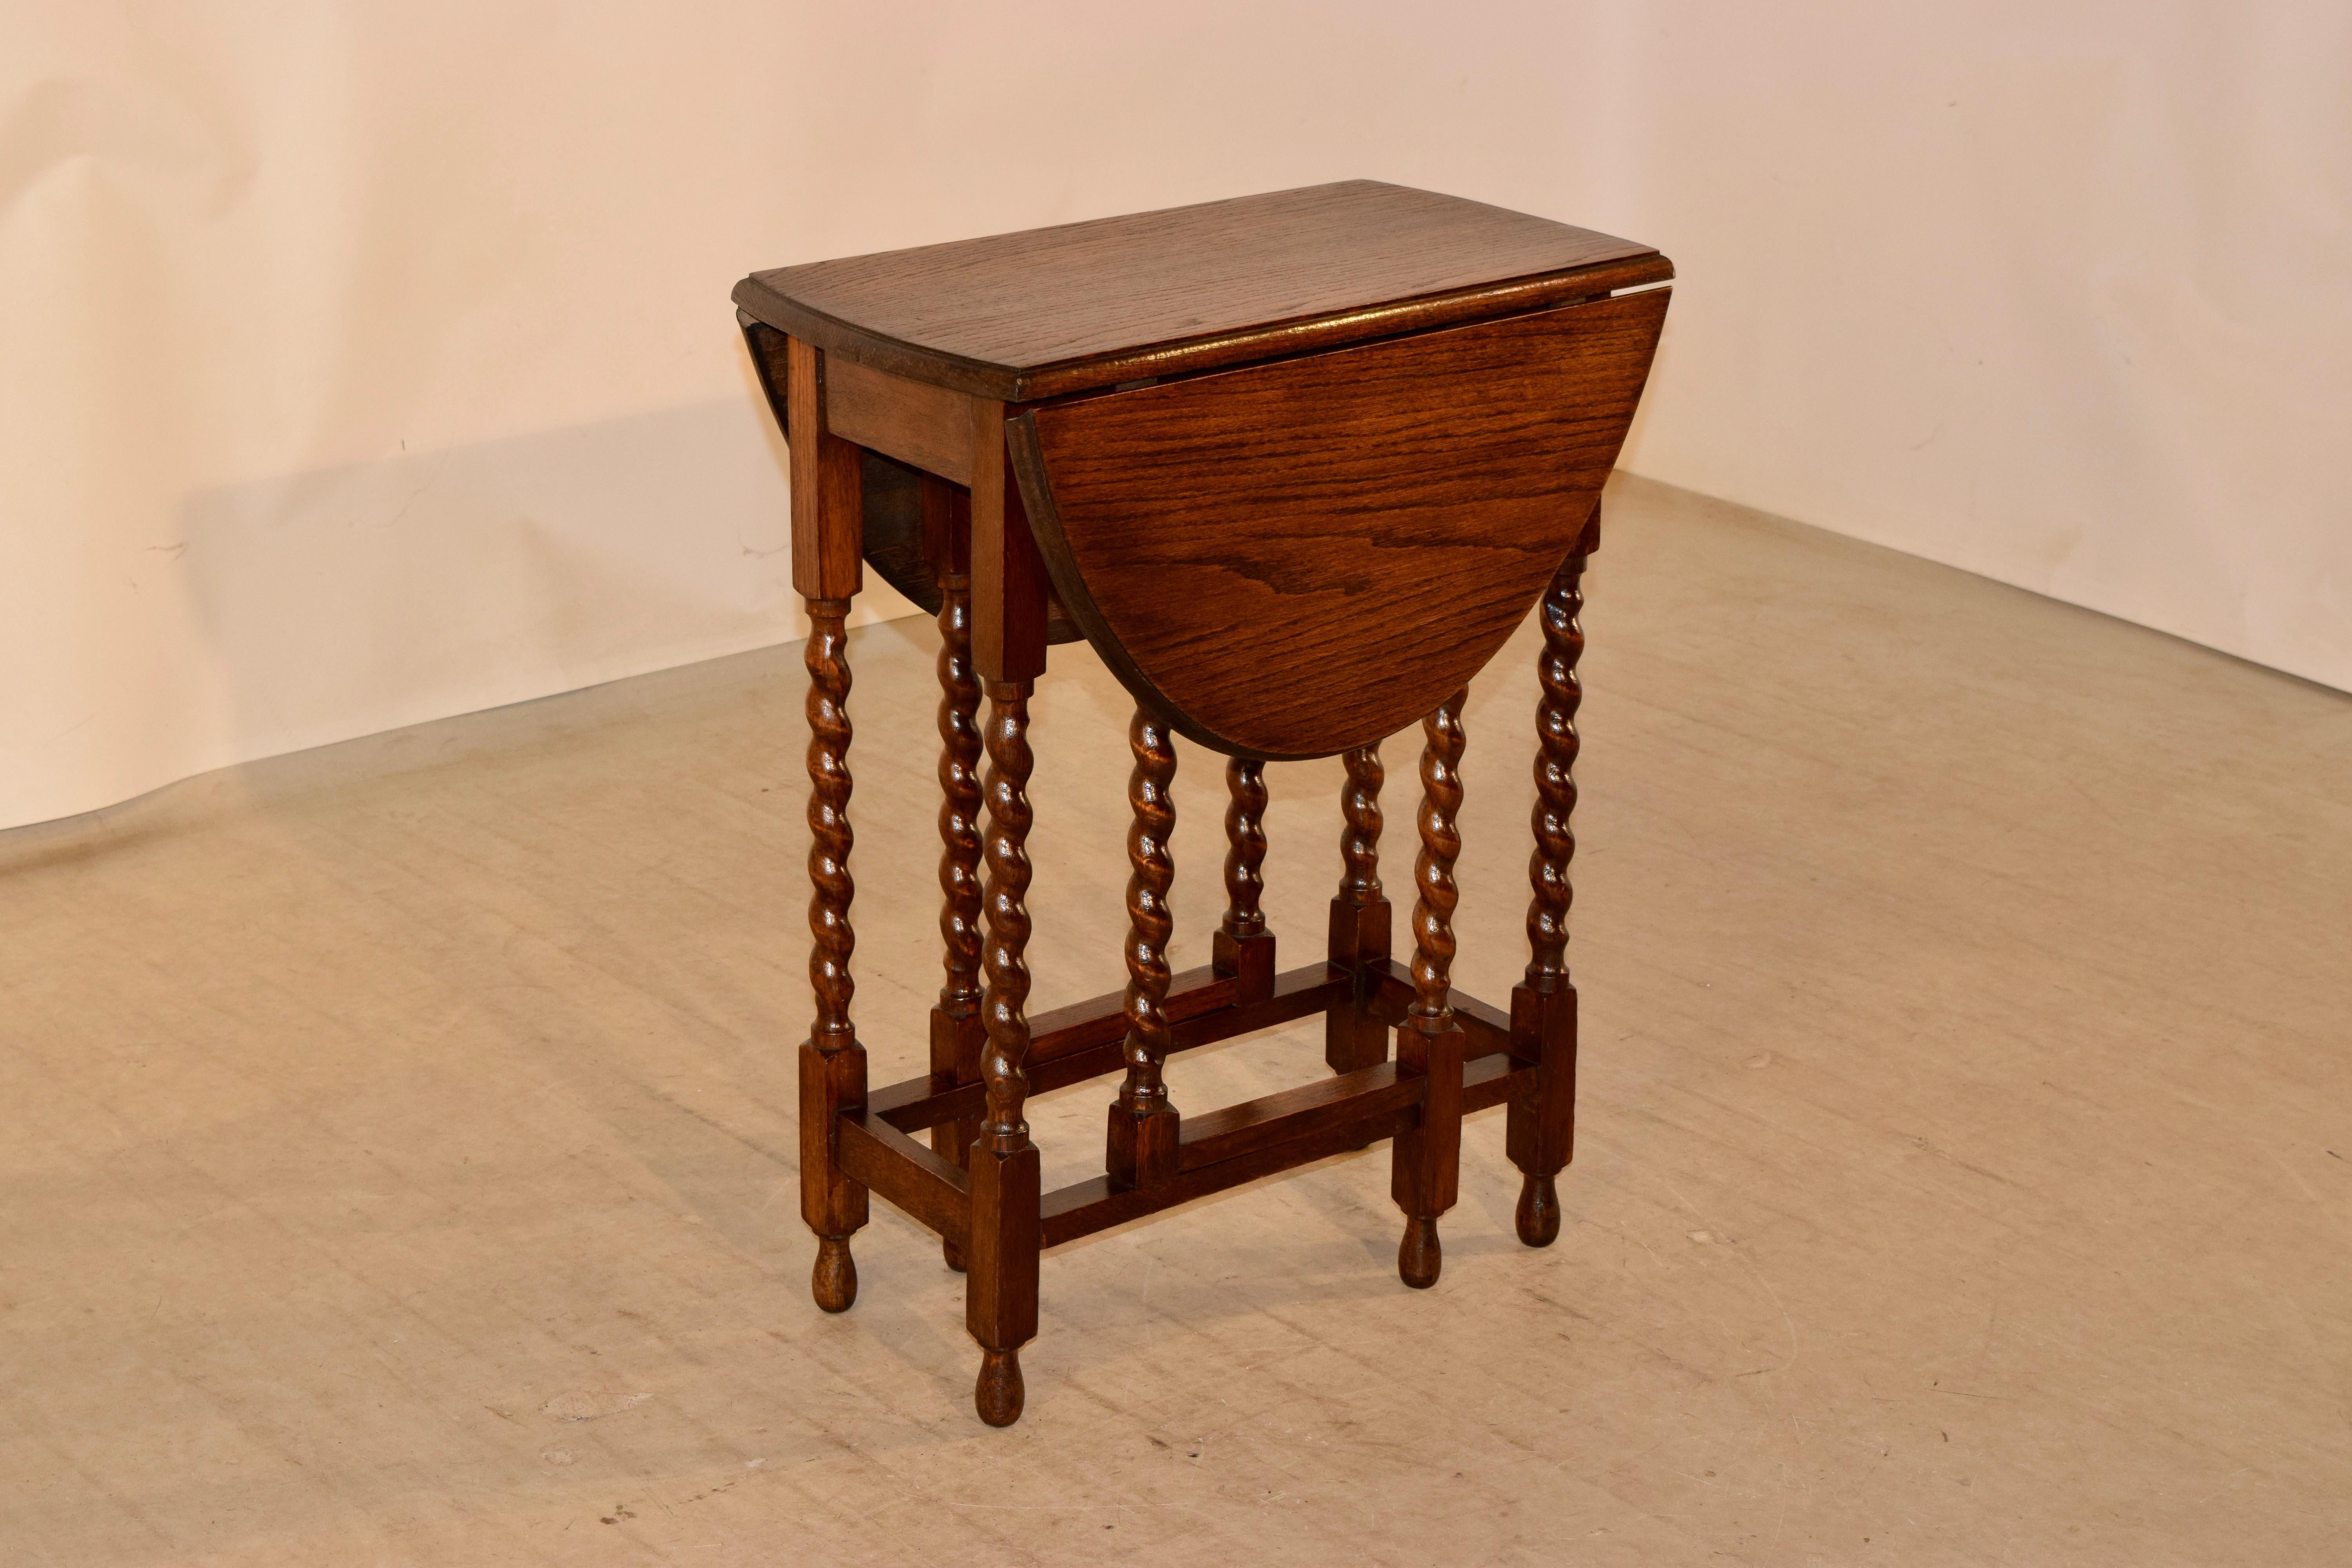 Edwardian period oak gate leg table from England, circa 1900. The top has a beveled edge and follows down to a simple apron. It is supported on hand-turned barley twist legs and gates, all with simple stretchers. The top open measures: 34.38 x 23.5.